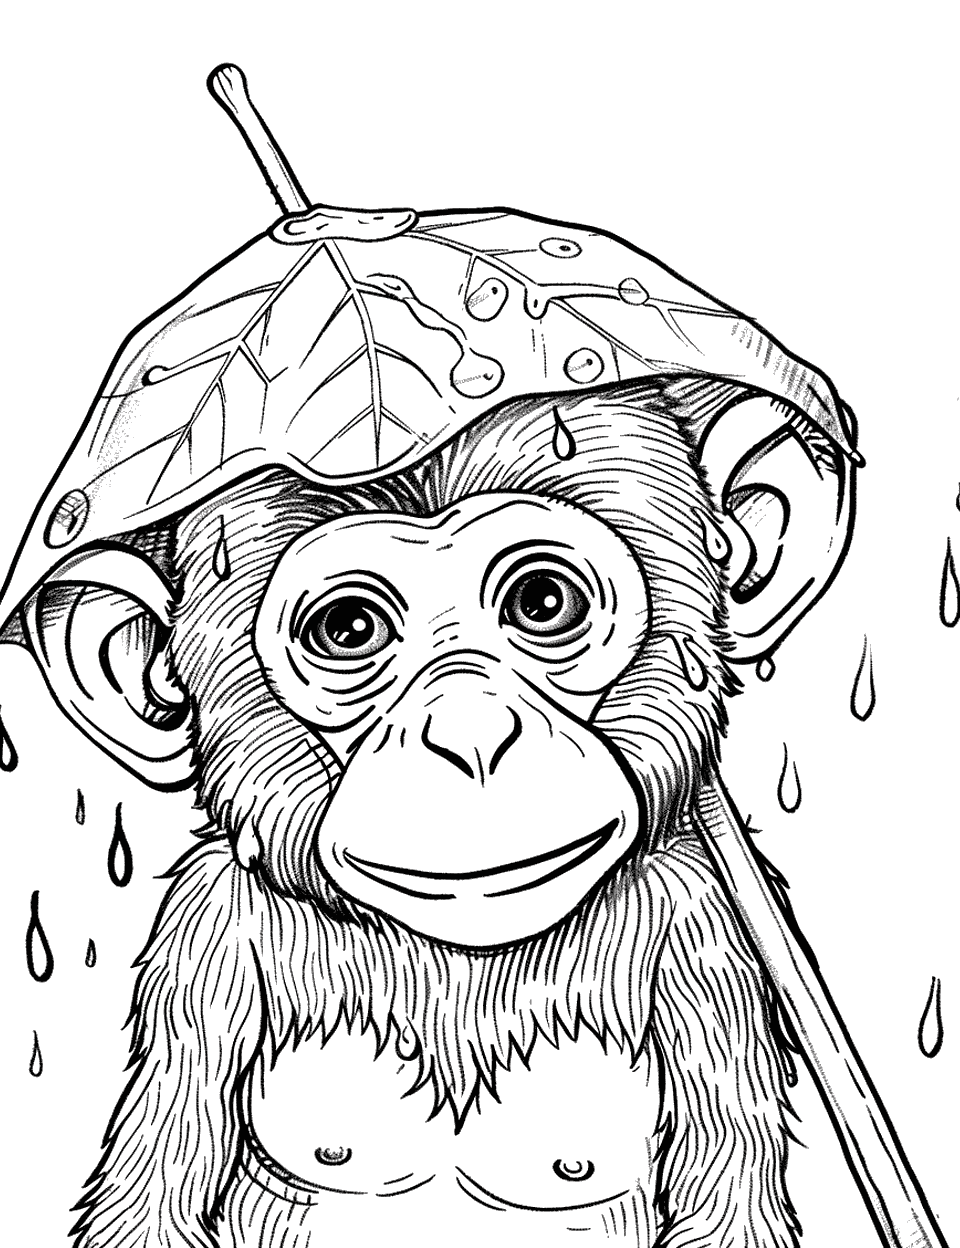 Monkey in the Rain Coloring Page - A monkey with a leaf over its head as a makeshift umbrella during rain.